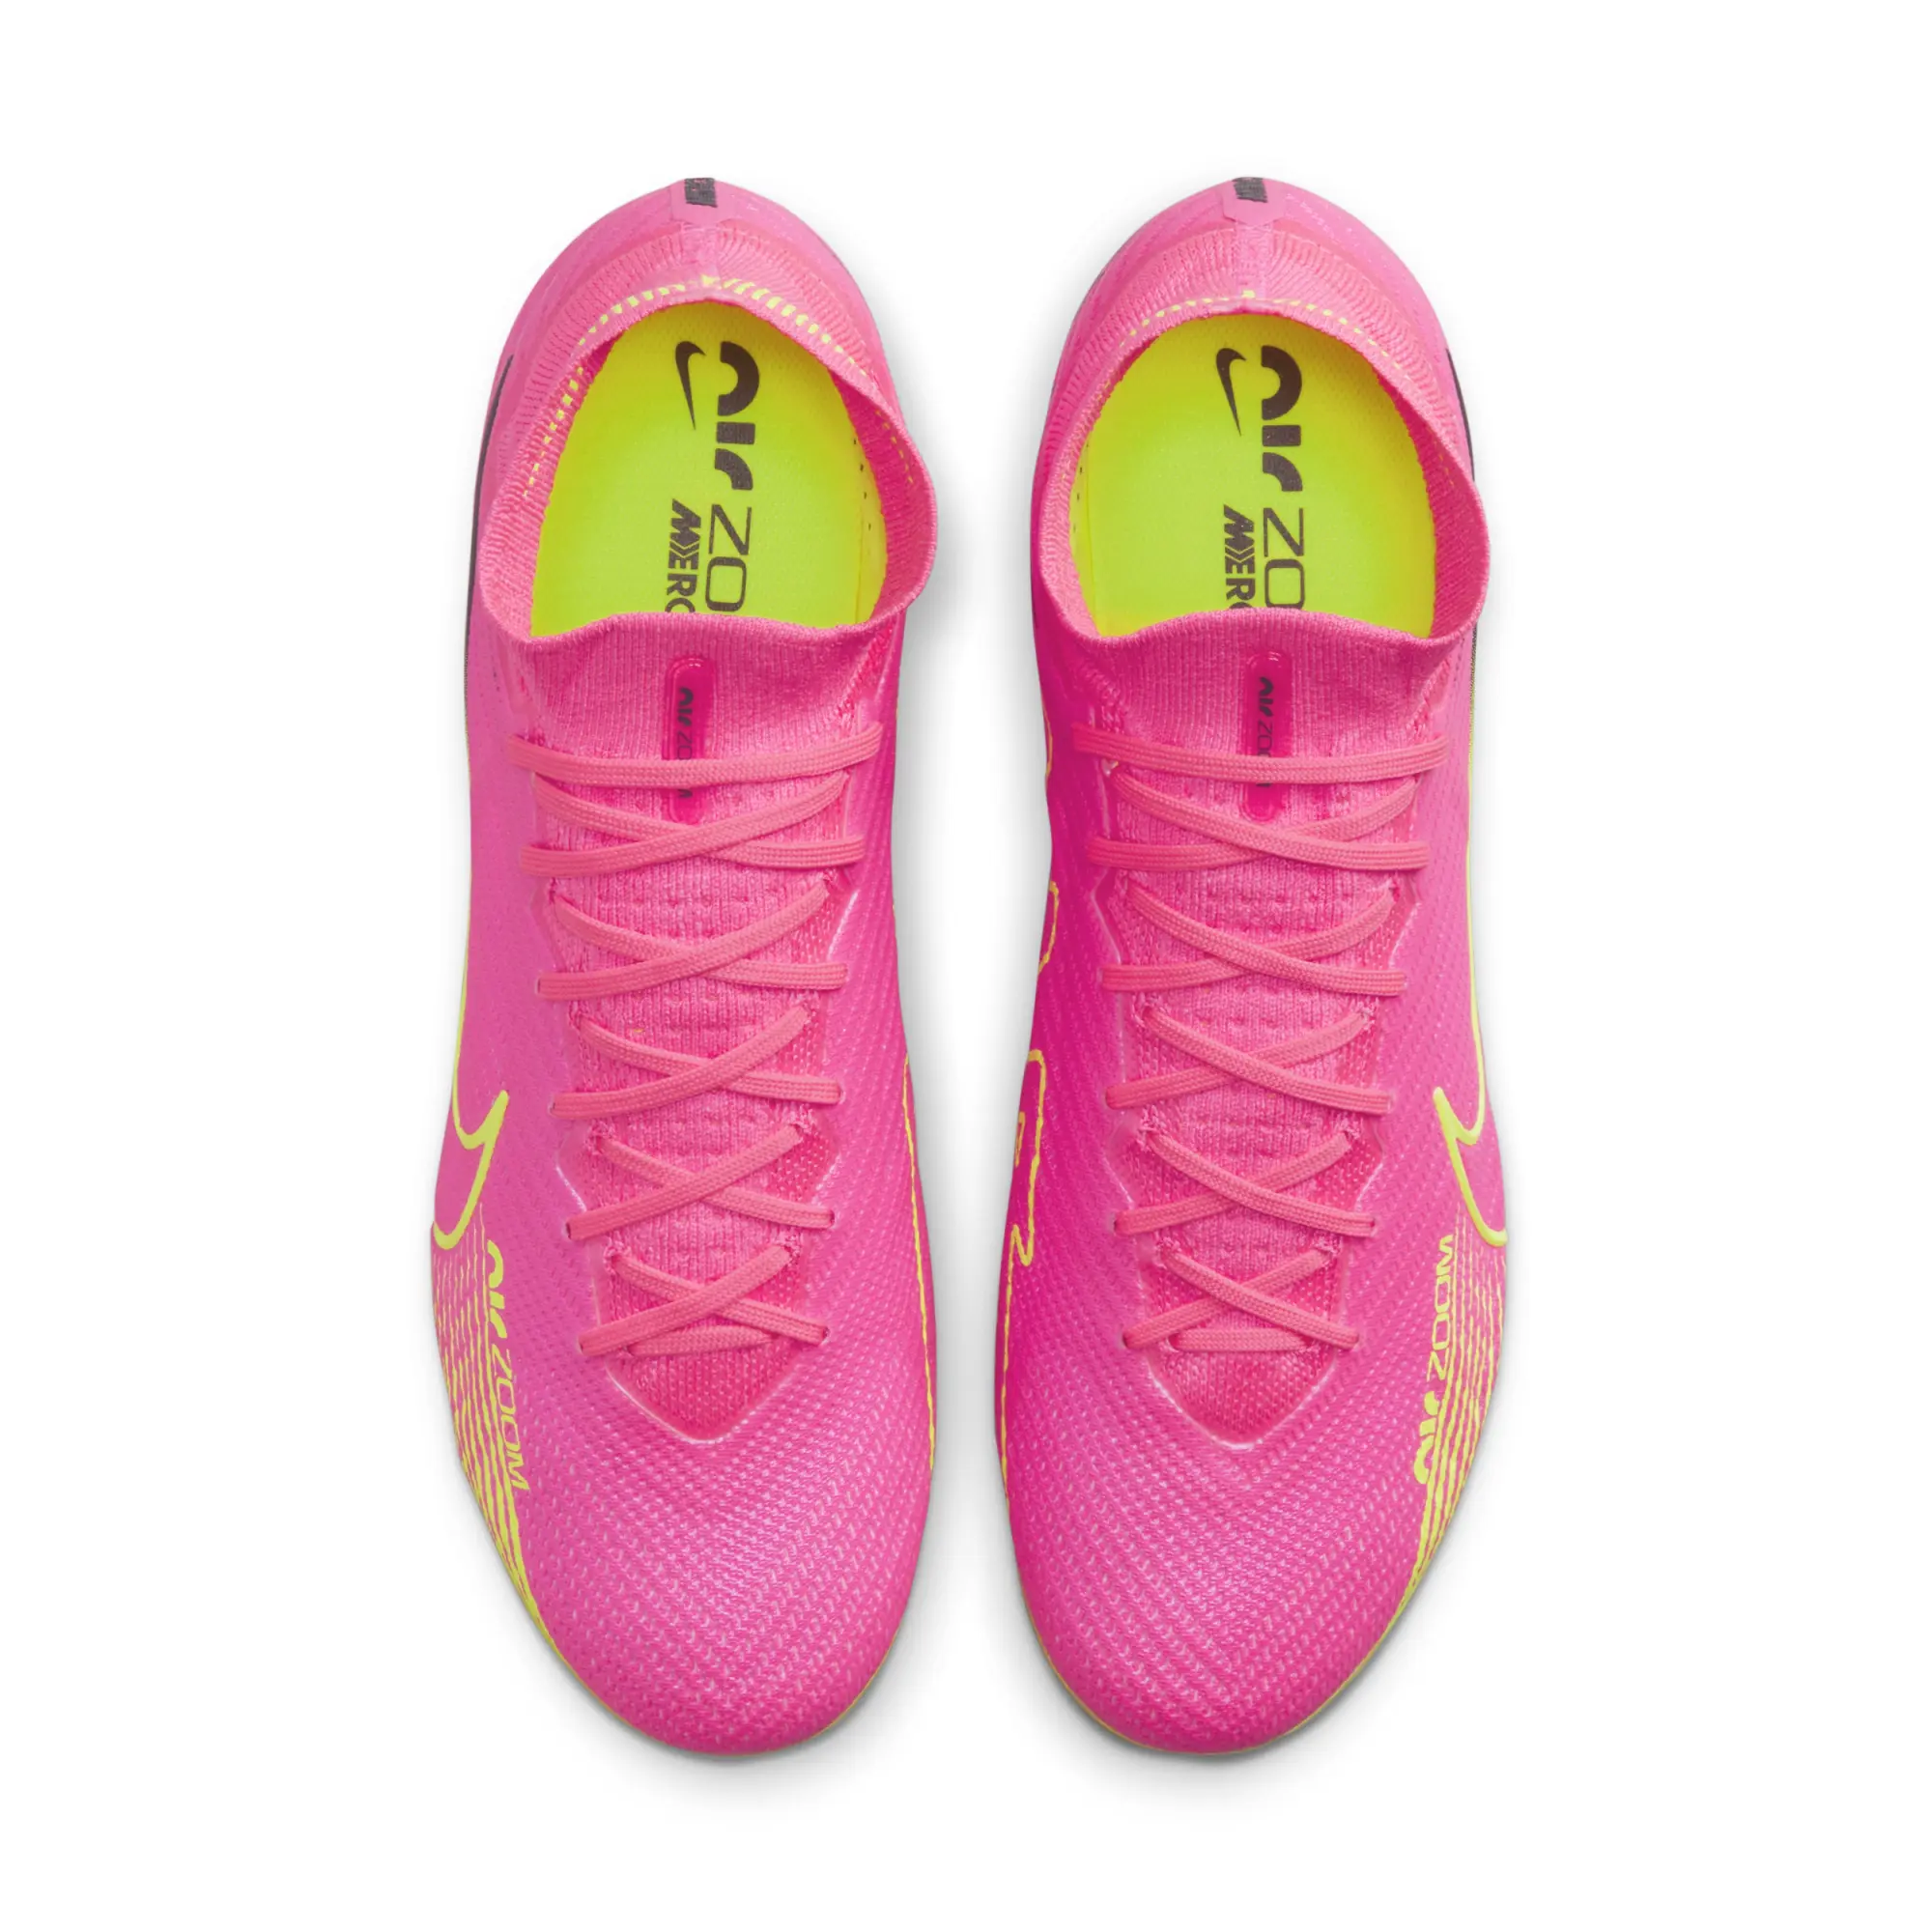 Nike Mercurial Superfly 9 Elite Firm-Ground Football Boot - Pink ...